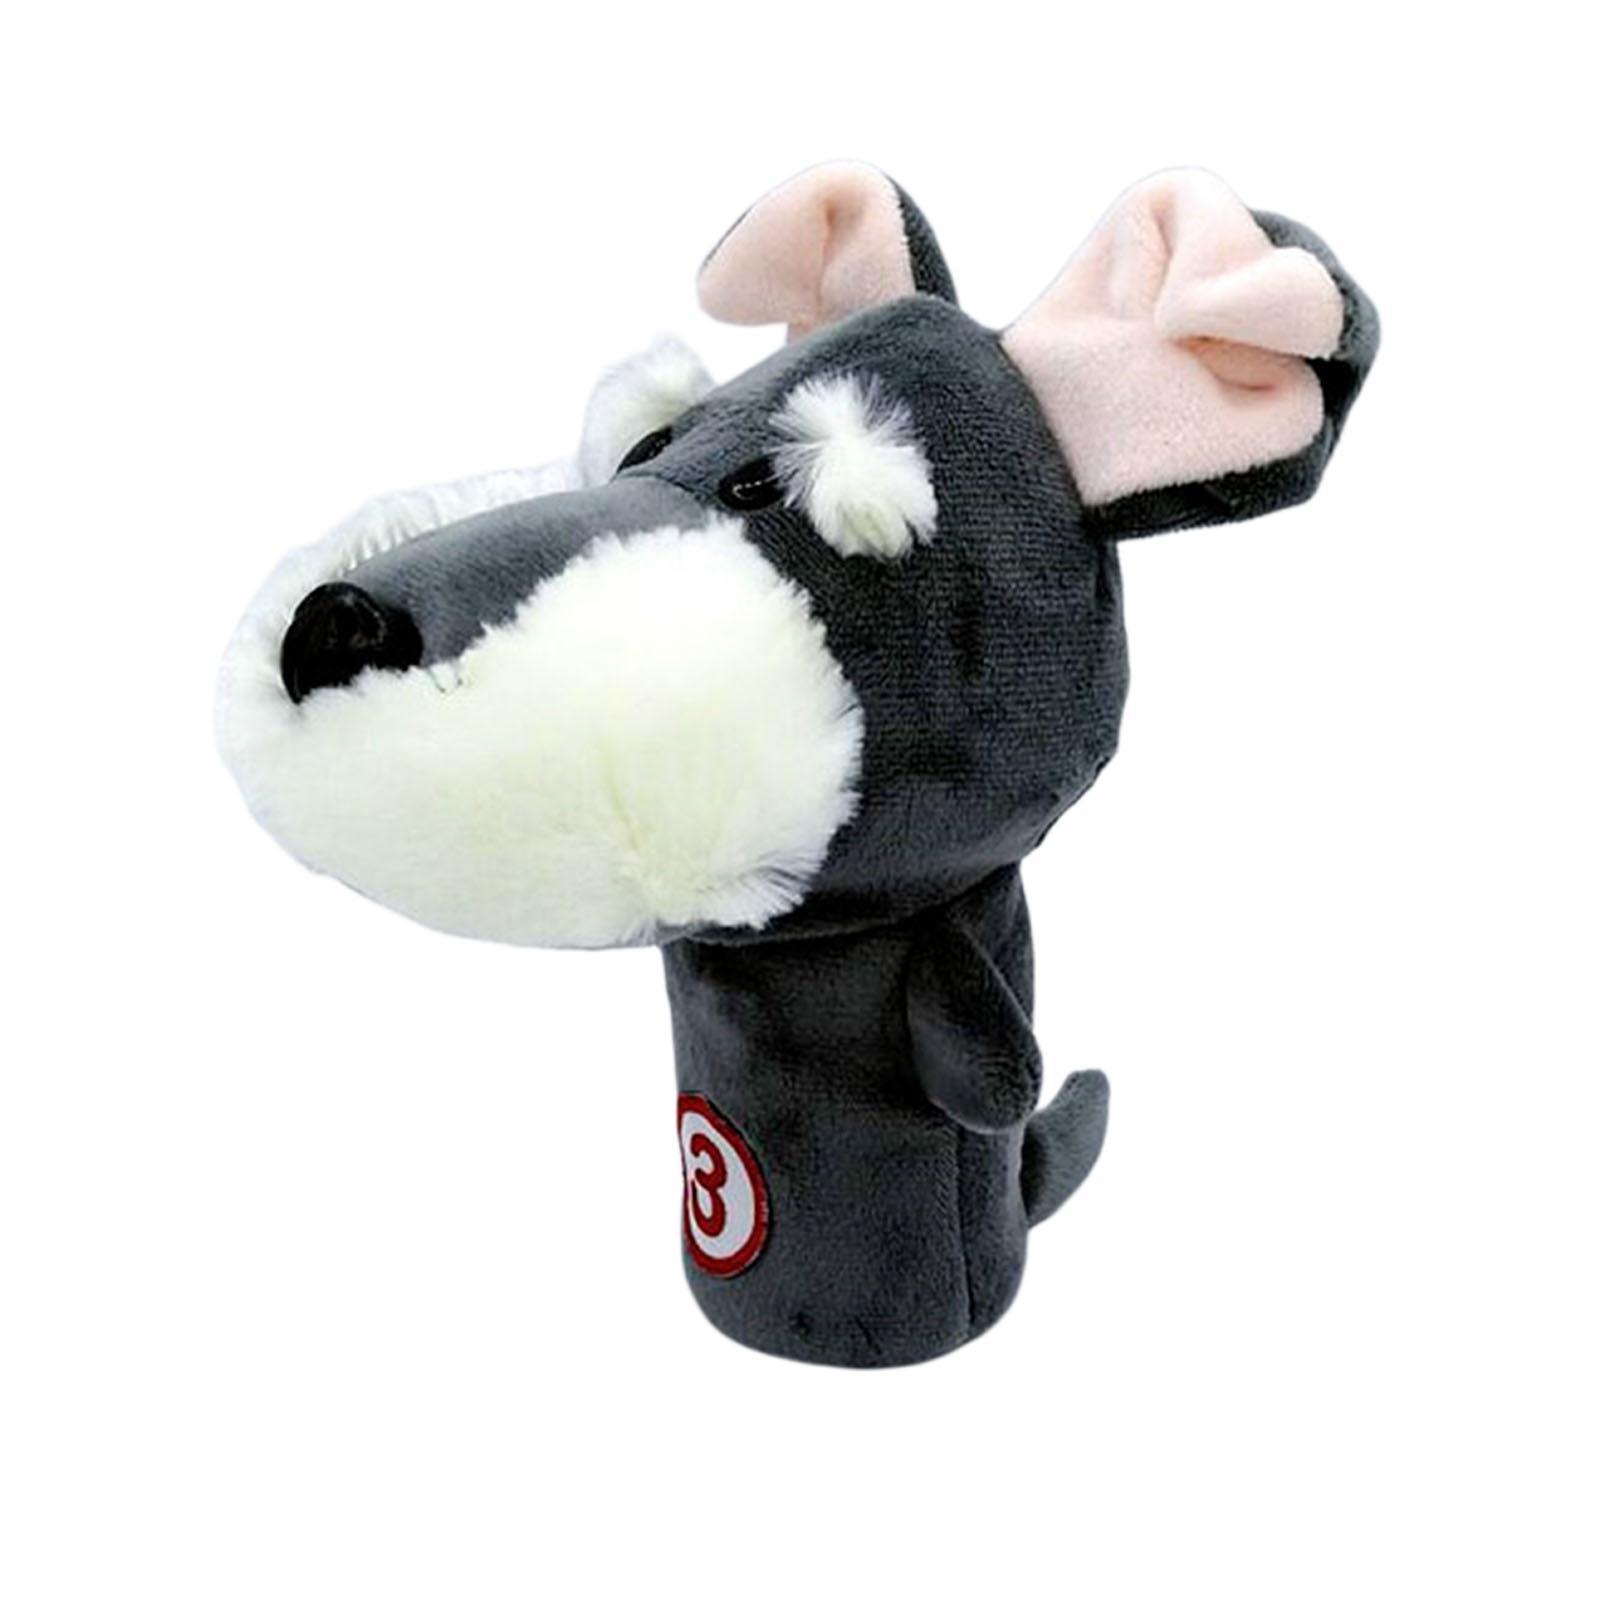 2x Novelty Plush  Iron Headcover Wedges Club Head Cover,   Provides   for Your Irons